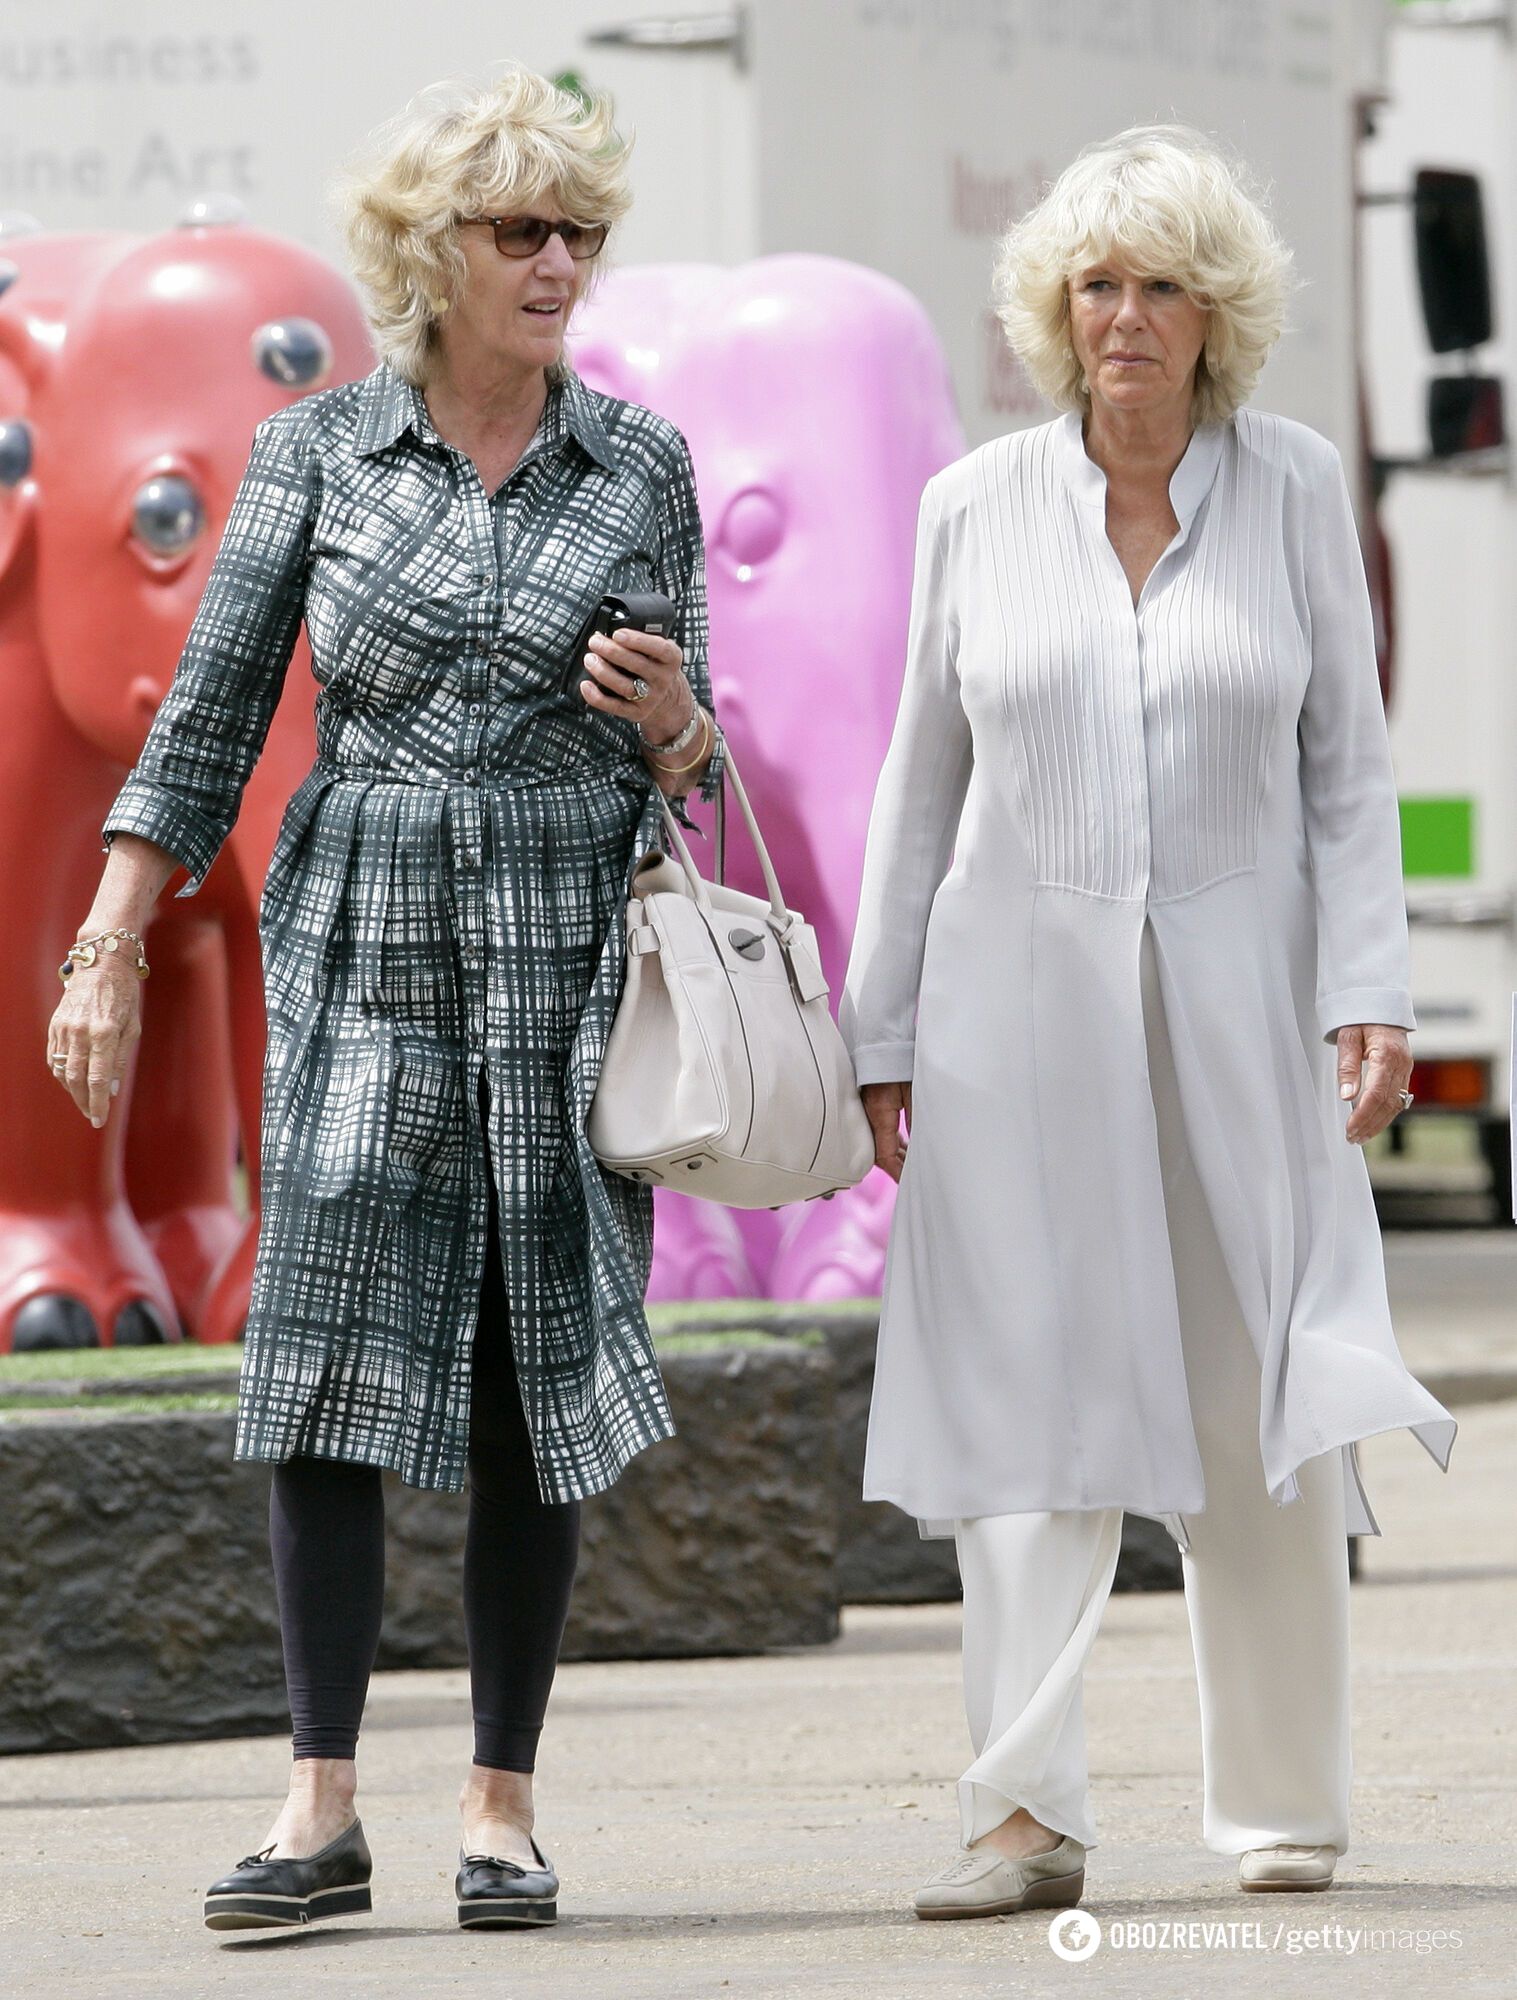 The Queen's 'Rock': what Camilla's younger sister, with whom she has an extremely strong bond, looks like